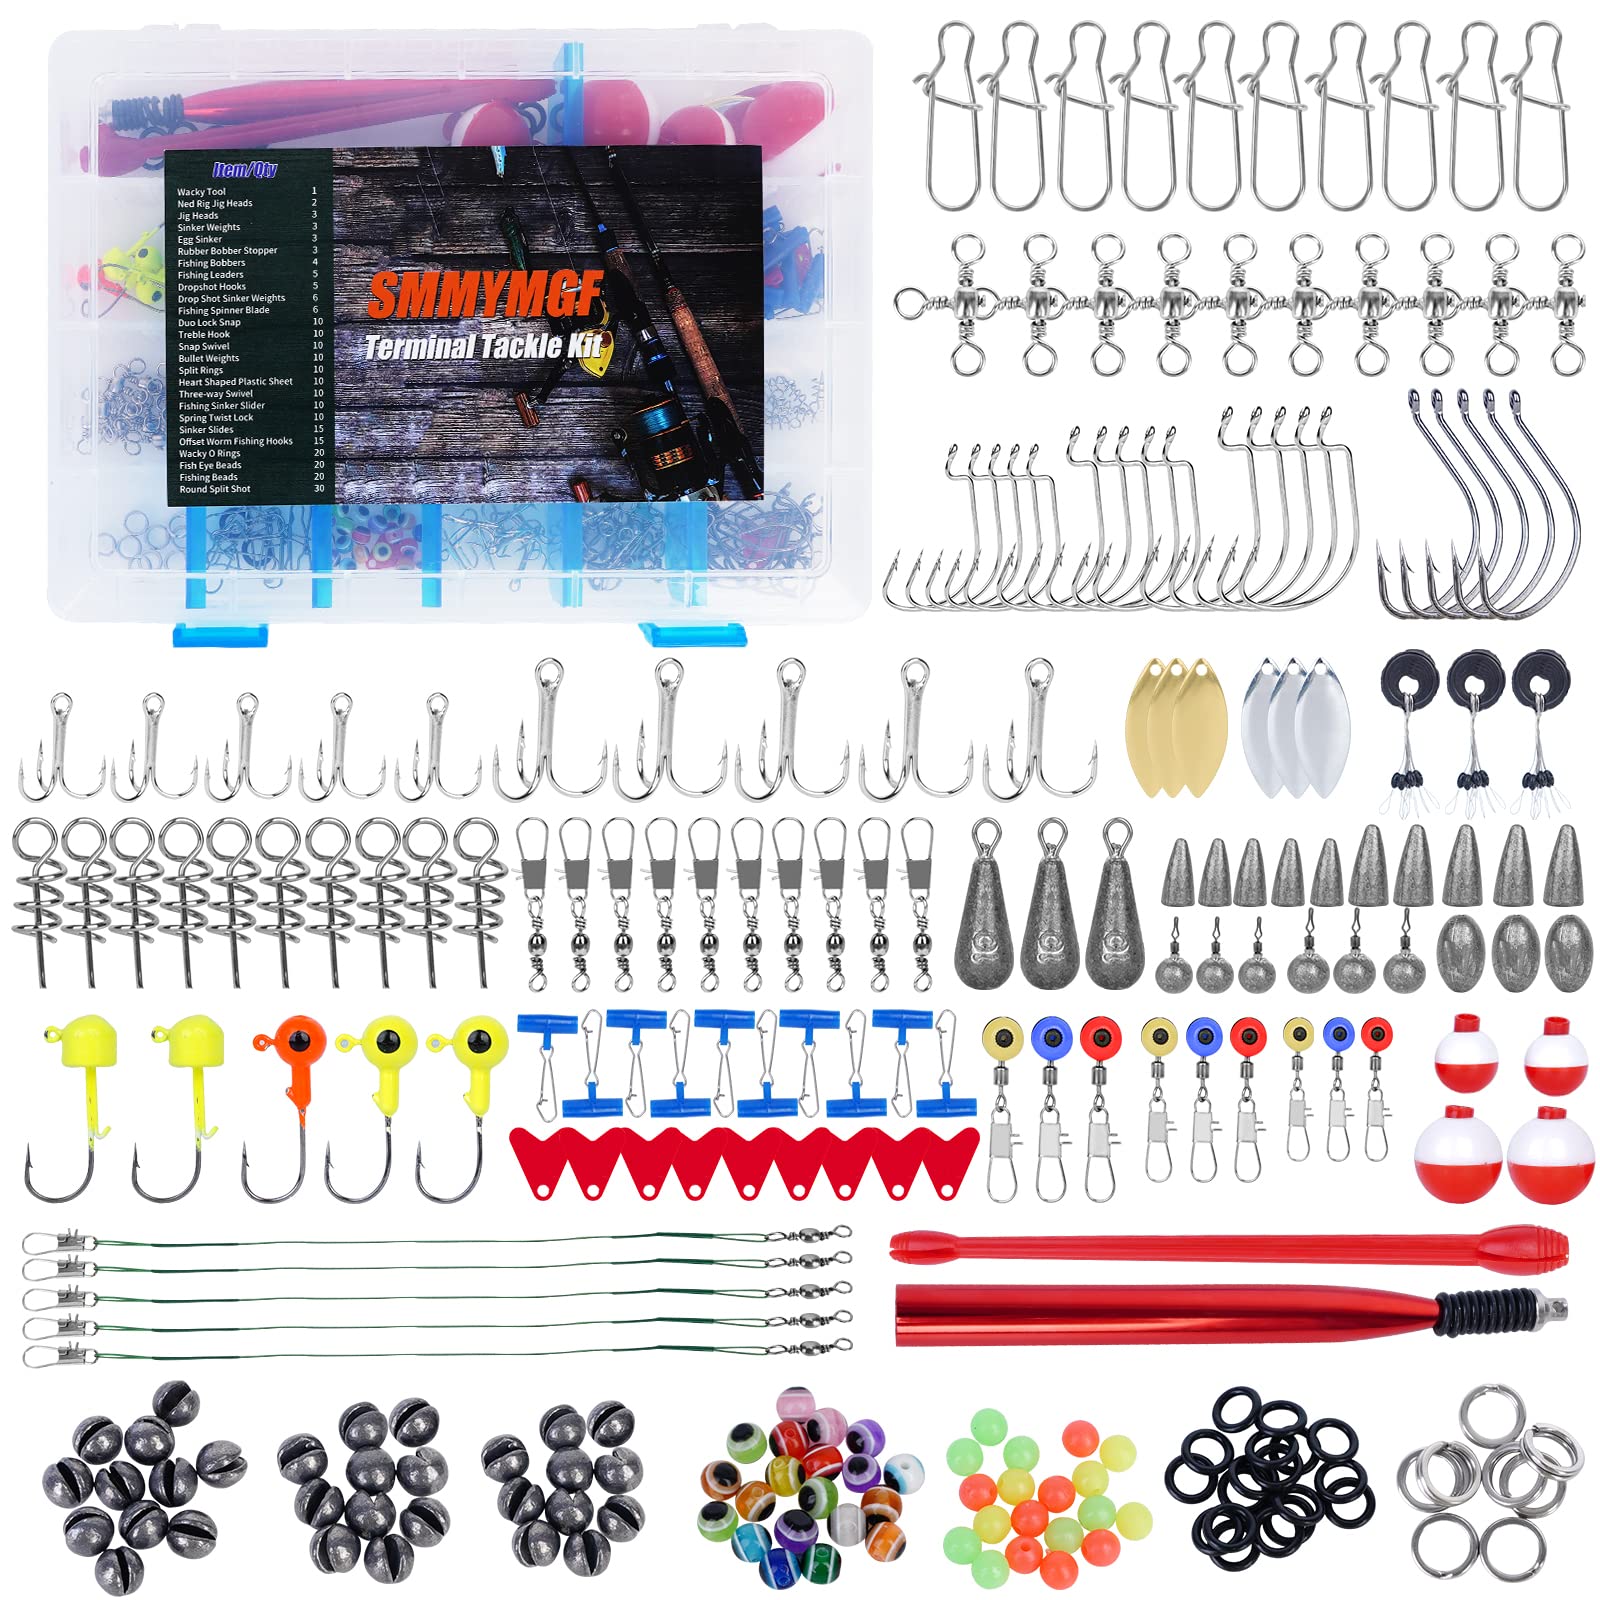 Fishing Lures Tackle Box Bass Fishing Kit,Saltwater and Freshwater Lures  Fishing Gear Including Fishing Accessories and Fishing Equipment for Bass, Trout, Salmon 253pcs Fishing Tackle Box